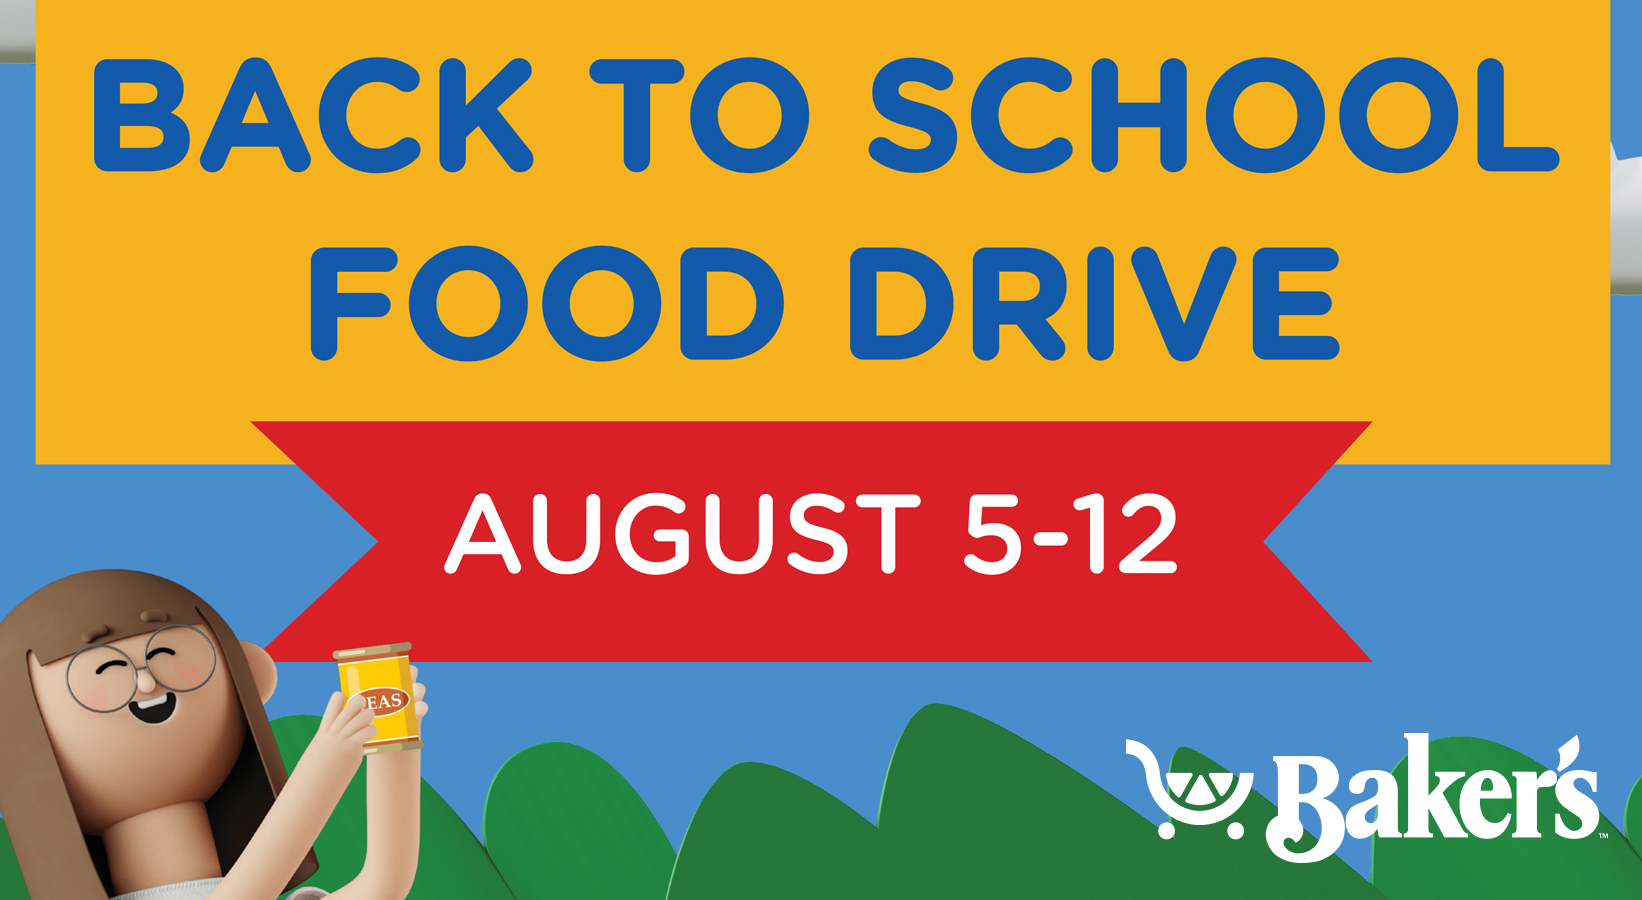 Baker's Back to School Food Drive August 5-12 graphic with person hold can of peas